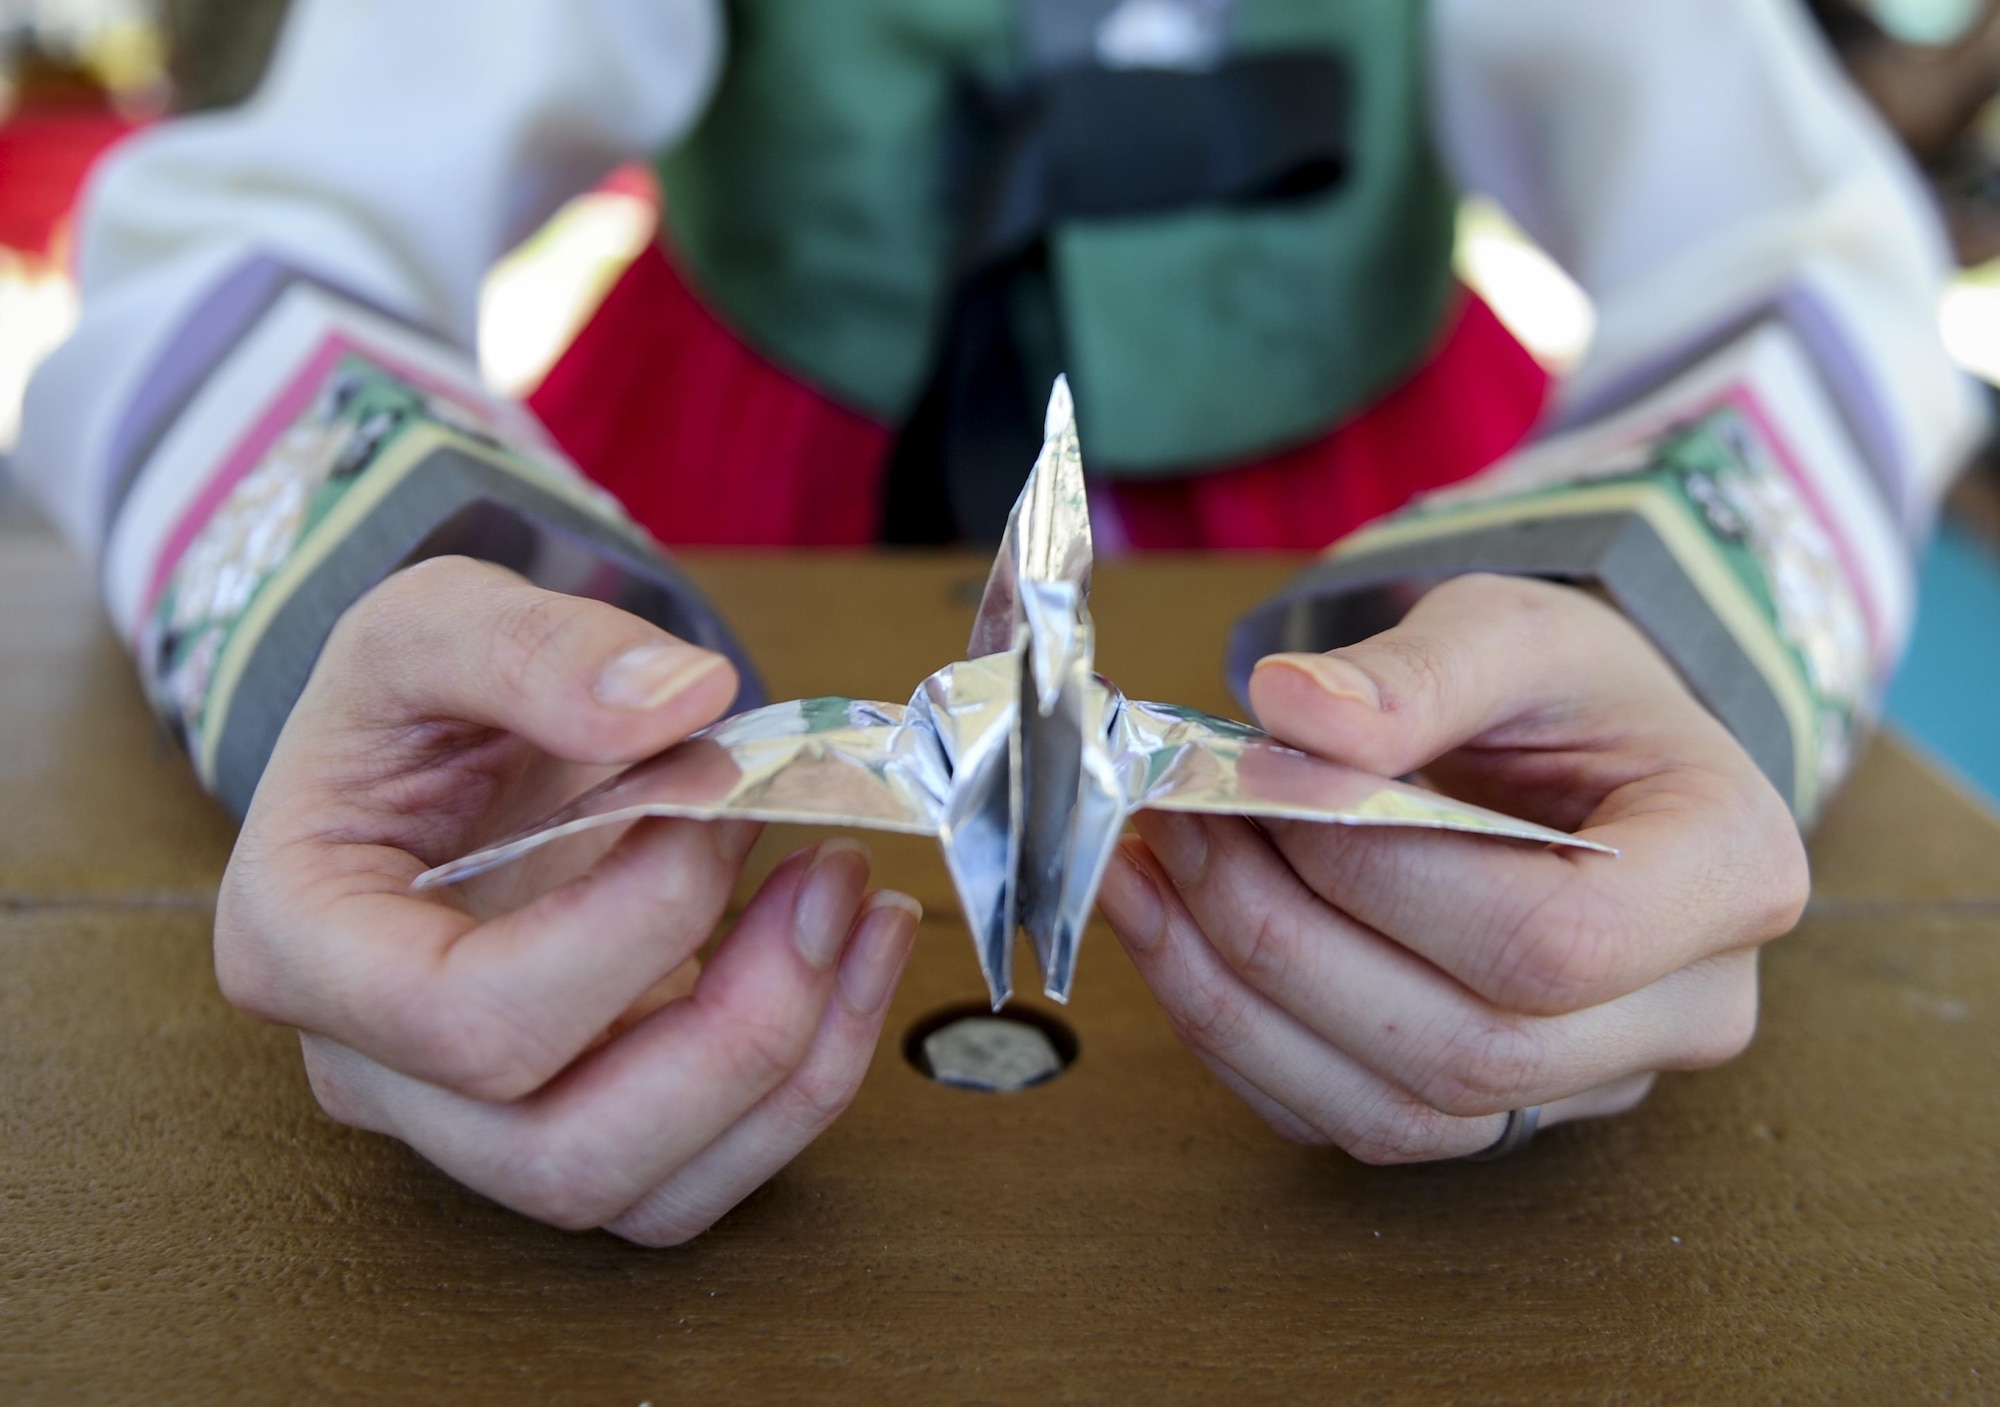 First Lt. Uiri Han, an executive officer with Headquarters Air Force Special Operations Command, folds a crane out of origami papers during the Asian American and Pacific Islander Cultural Day event at Hurlburt Field, Fla., May 25, 2017. Origami is a traditional form of entertainment which dates of origin remain unknown. The Asian American and Pacific Islander Cultural Day event included the demonstration, free food and a hula demonstration. (U.S. Air Force photo by Airman 1st Class Dennis Spain)